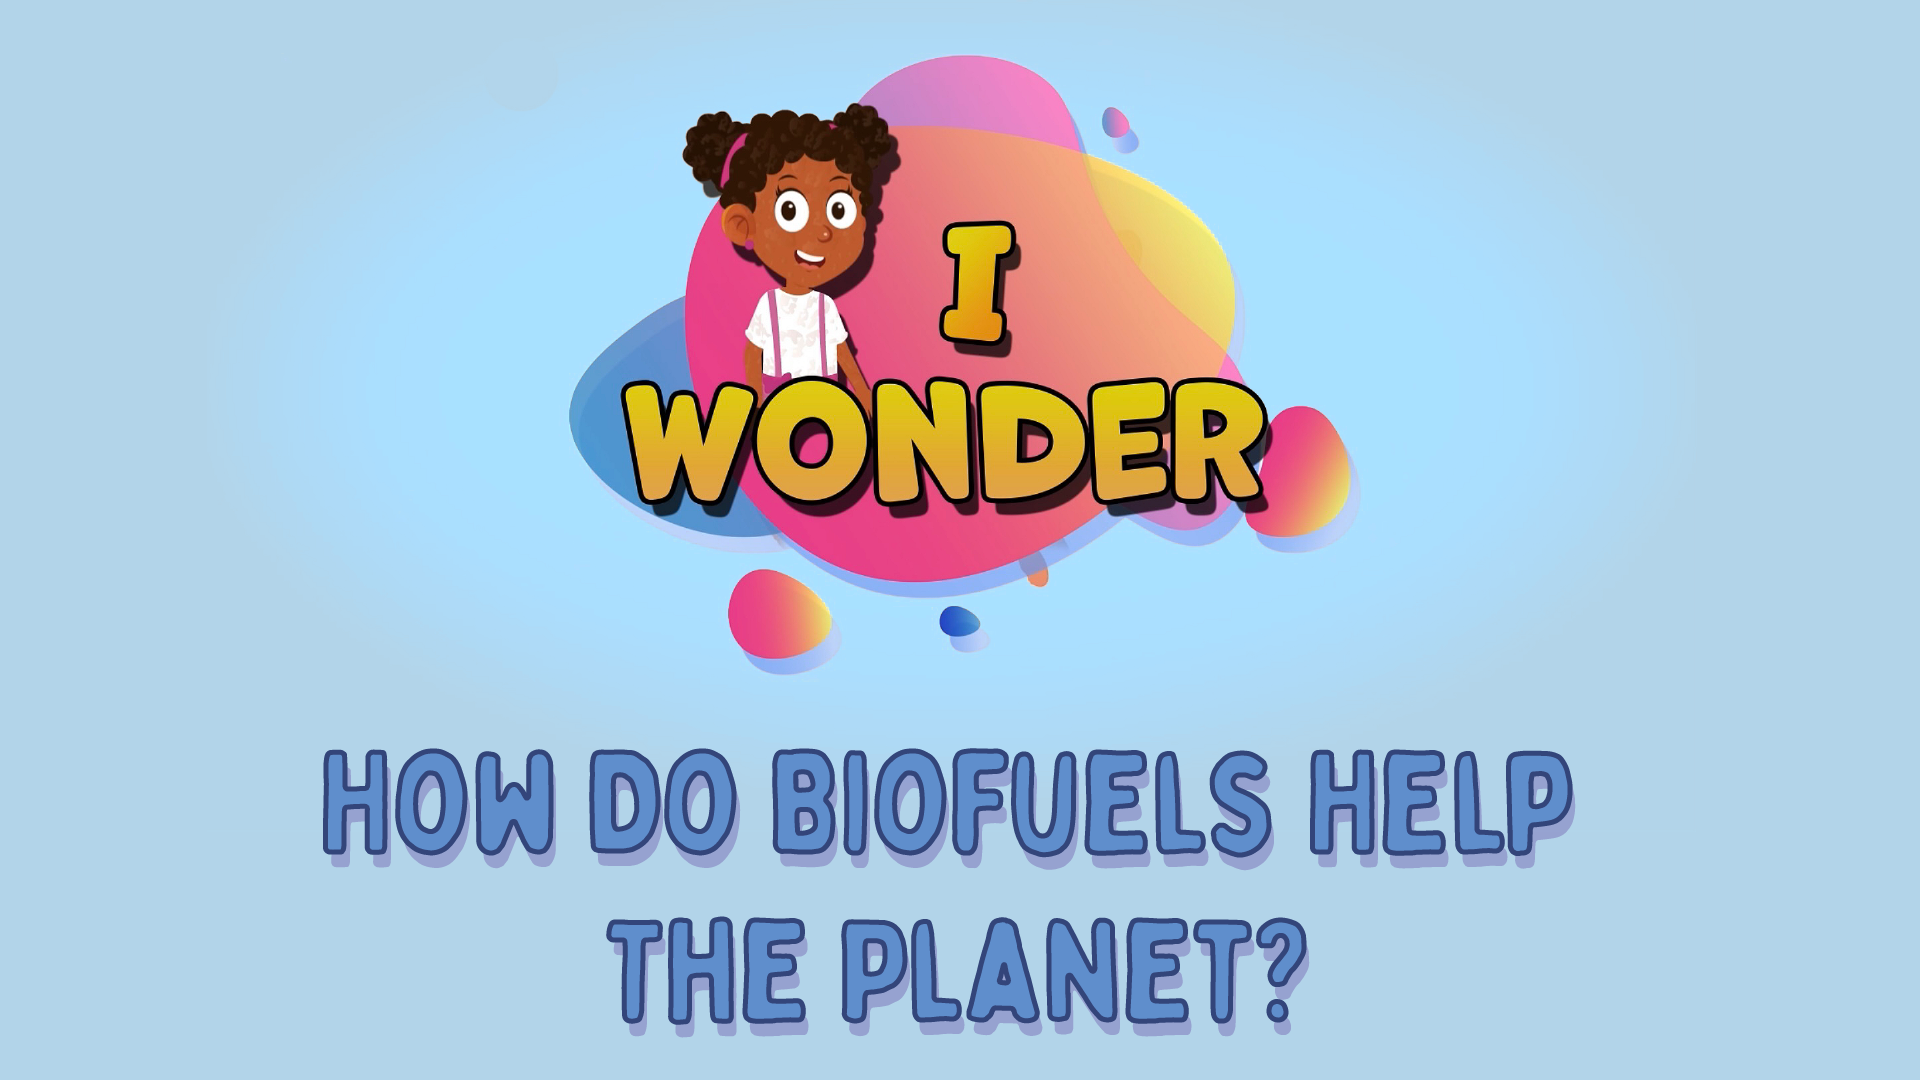 How Do Biofuels Help The Planet?